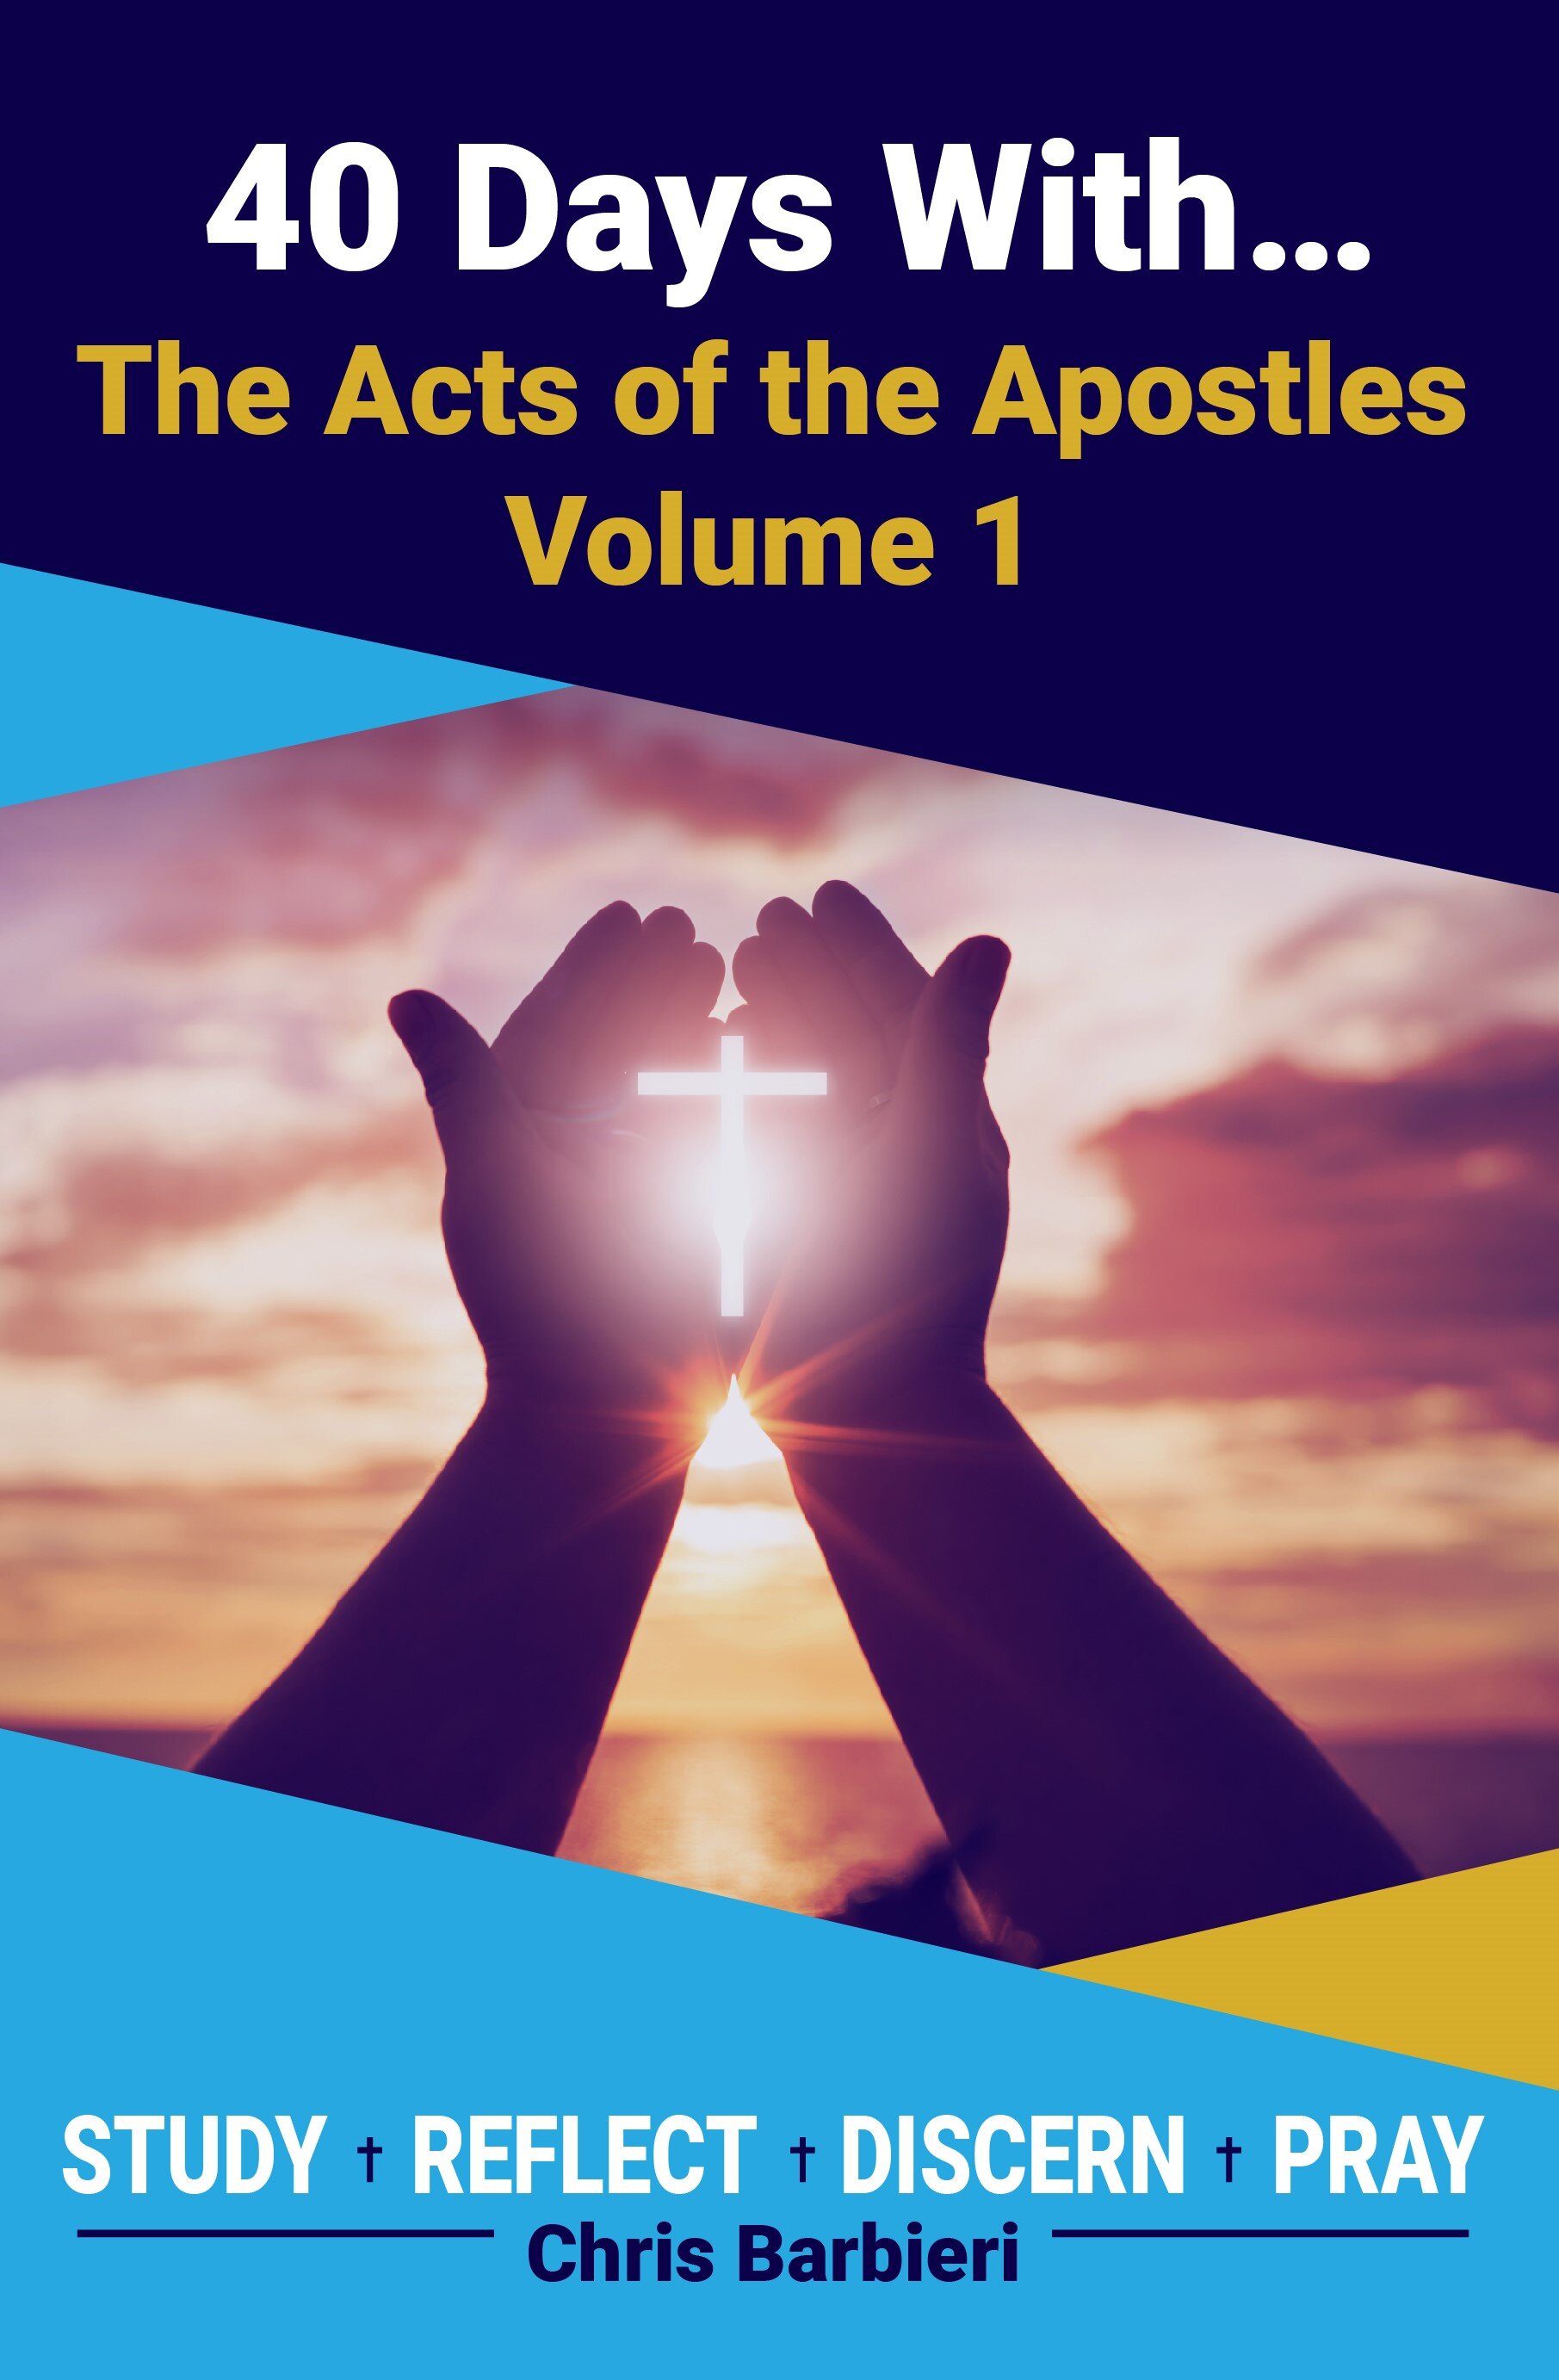 The Acts of the Apostles, Volume 1 - Front.jpg